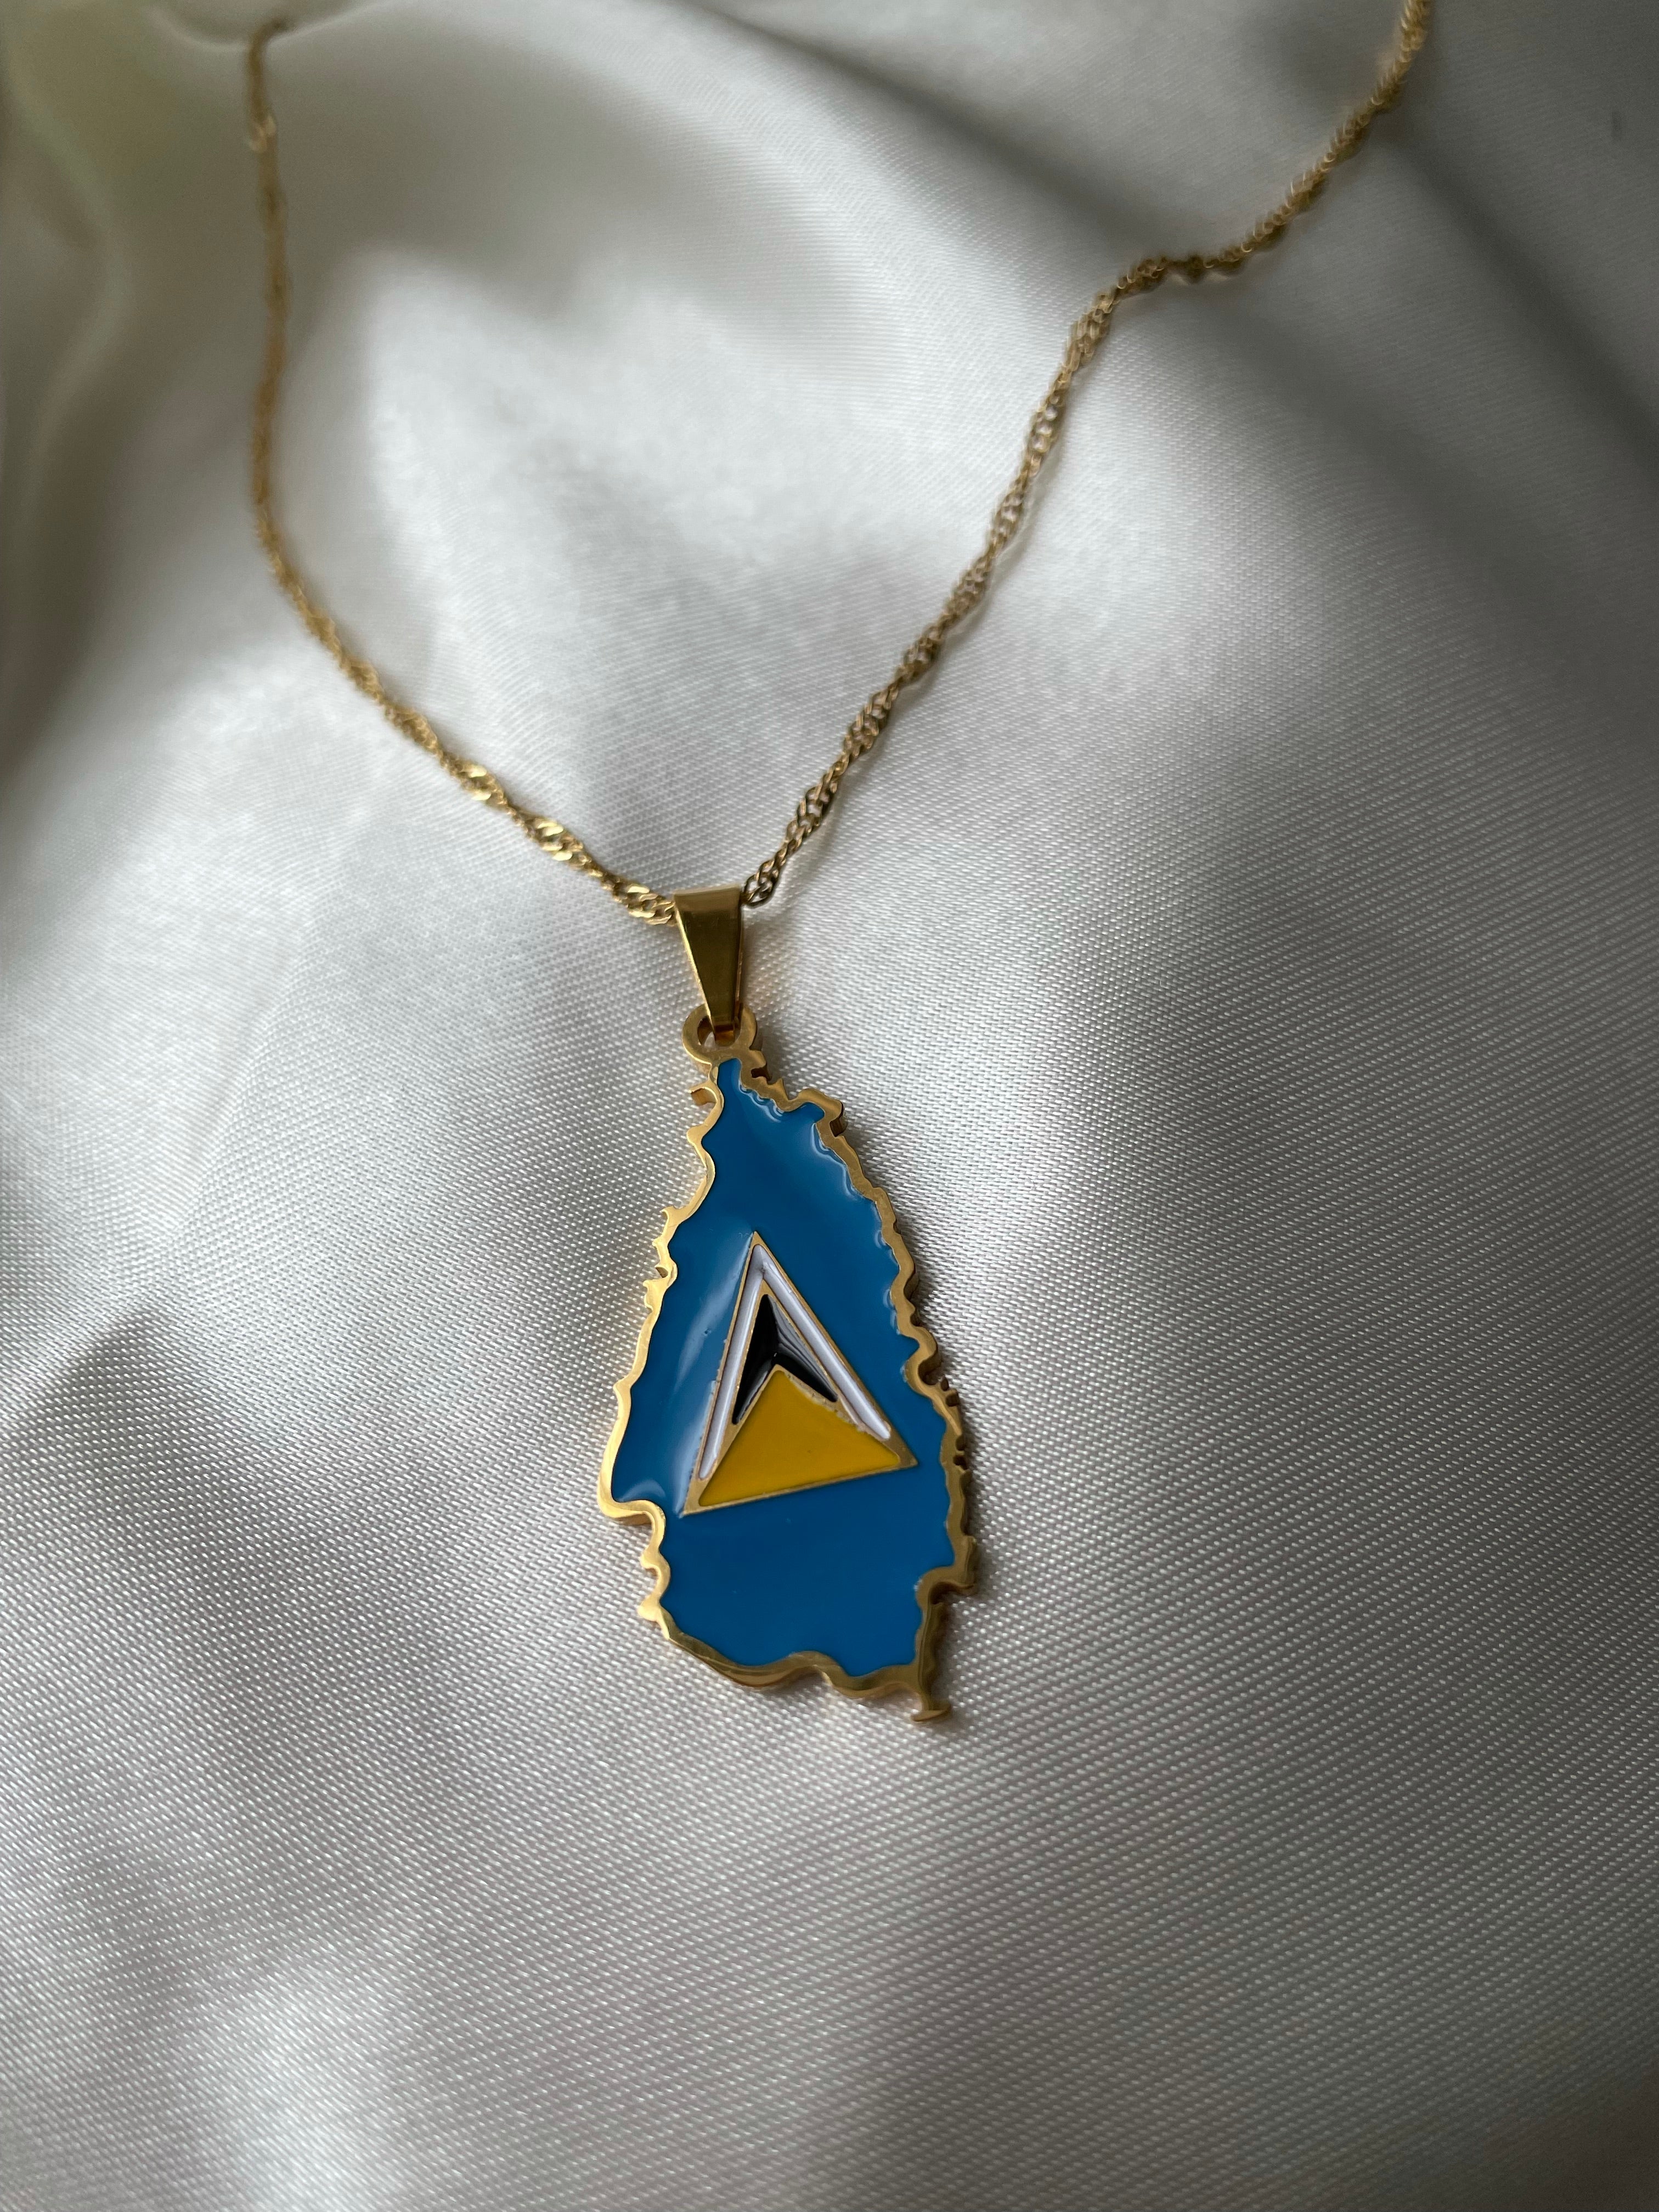 St Lucia Flag Necklace 🇱🇨 - “The Land, the people, the light”